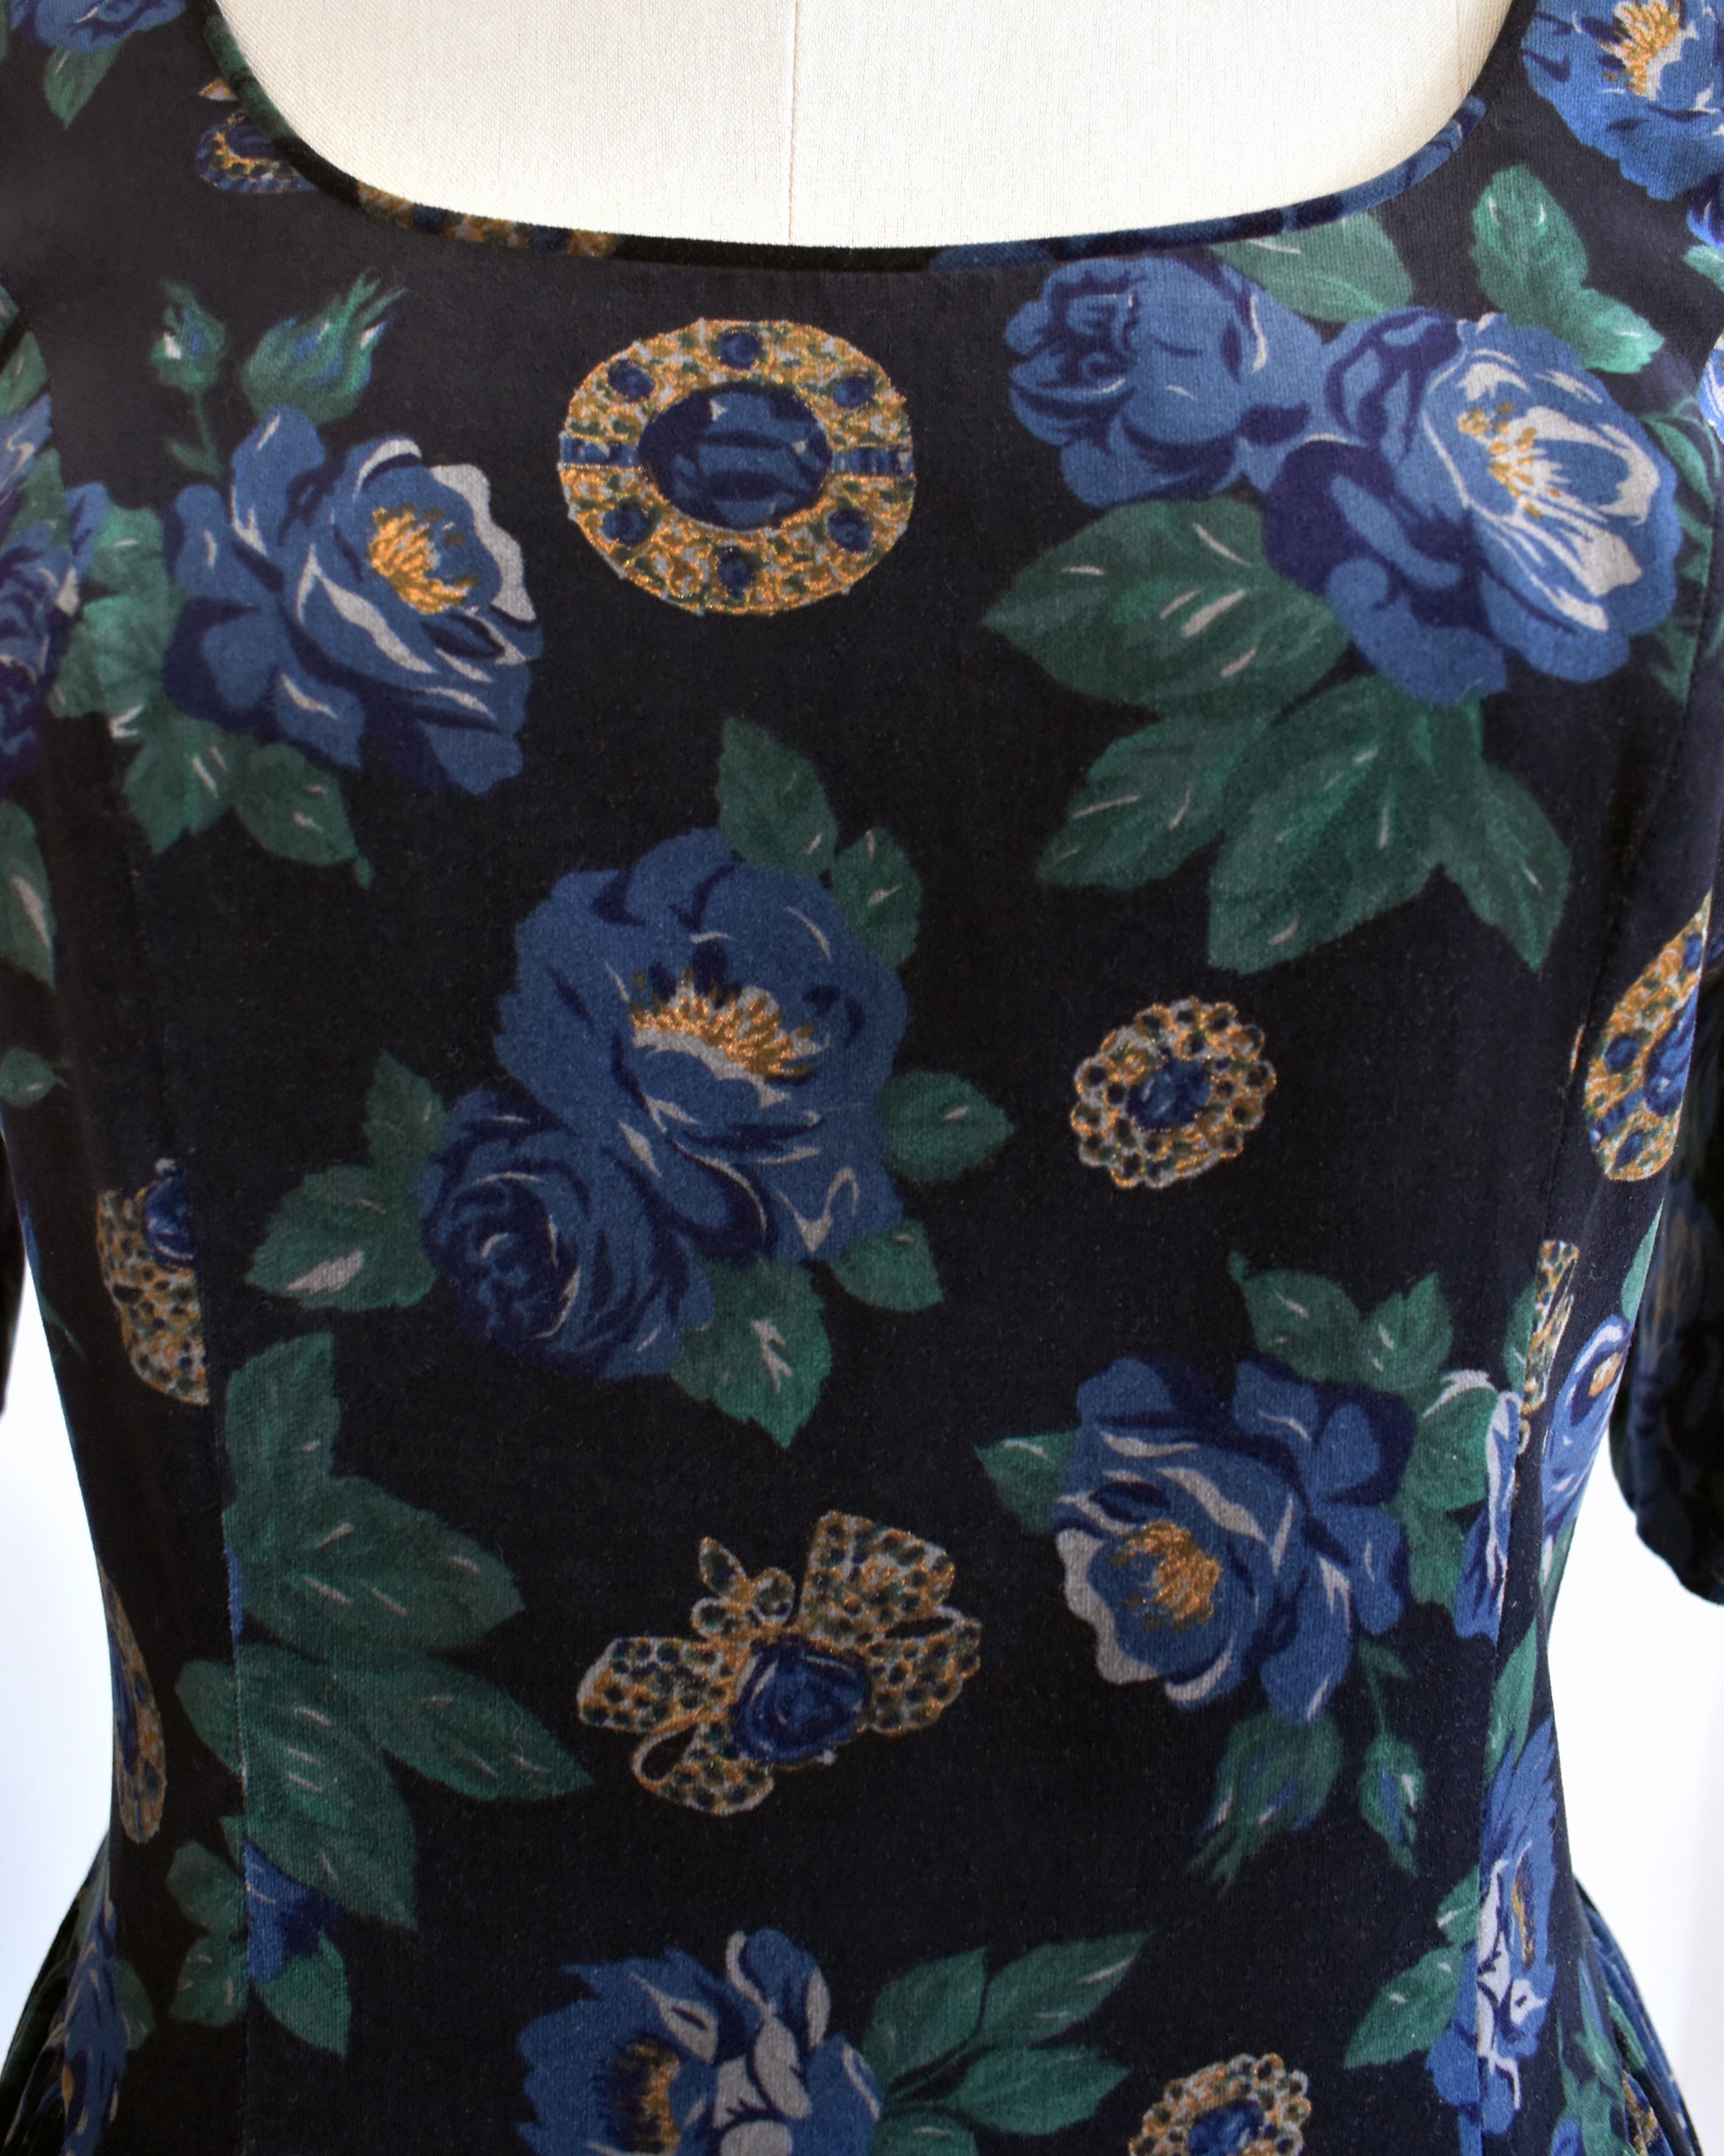 Close up of the floral and jewelry print